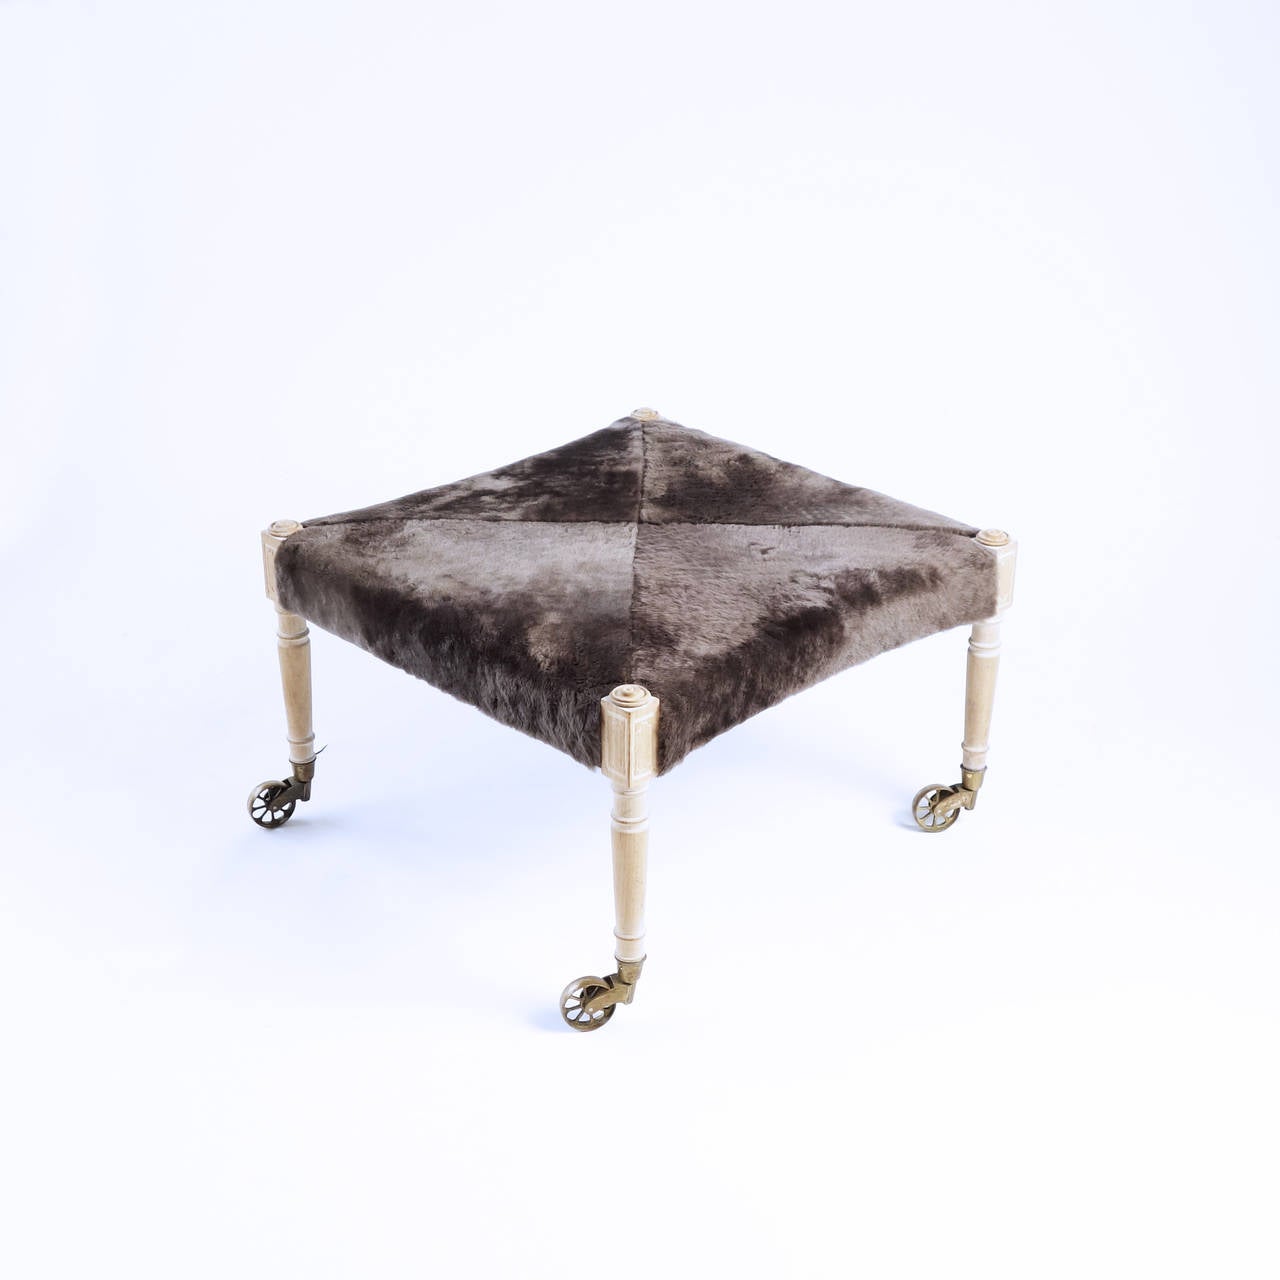 A piece whose design and proportions suggest great flexibility of use. The slender, limed wood legs end in large pivoting brass wheels. The seat is covered in a decadently soft wool shearling.